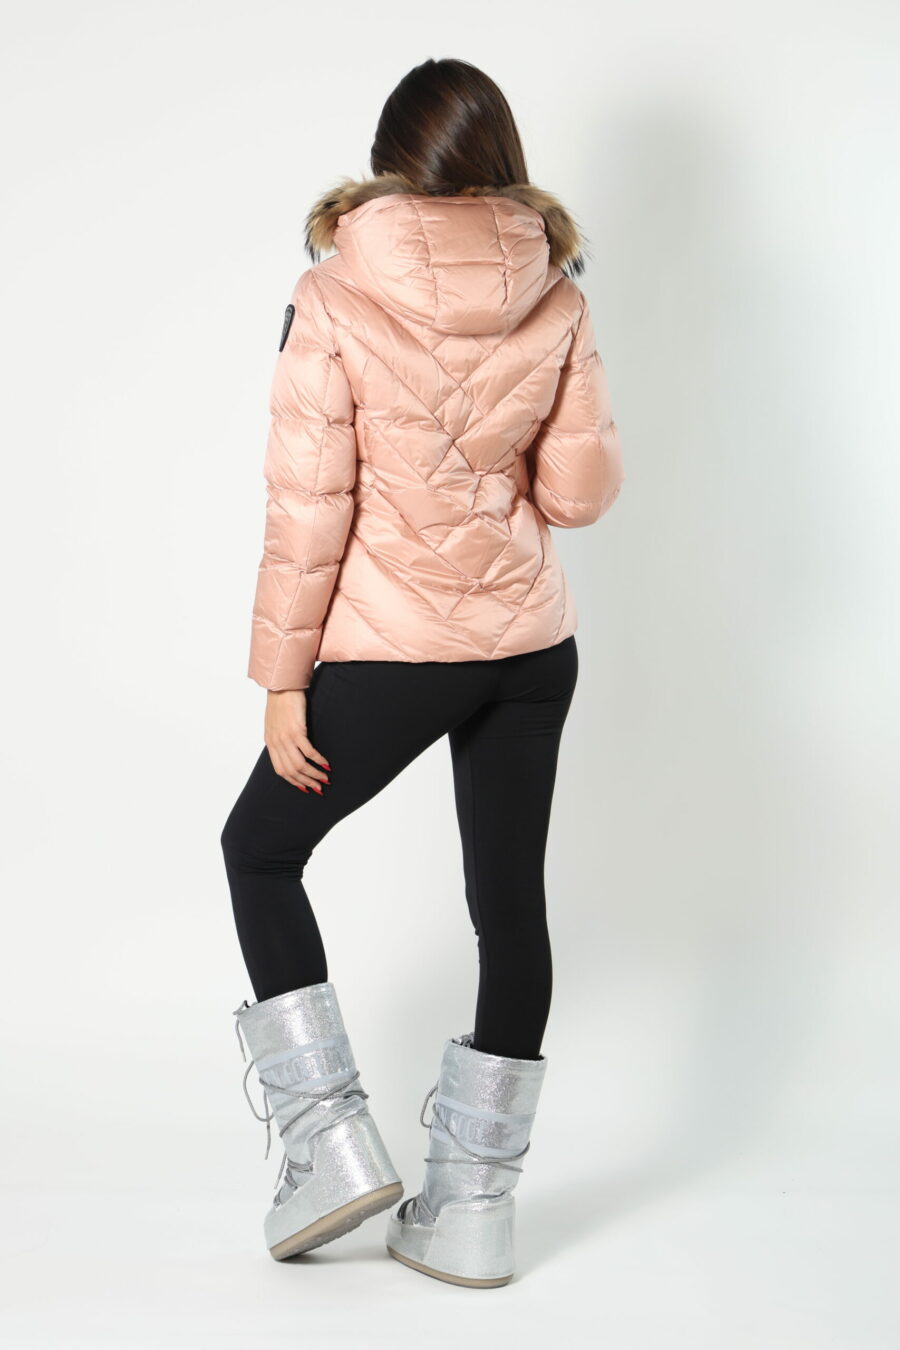 Pale pink hooded jacket with fur hood and diagonal lines and violet lining - 8052865435499 111 scaled